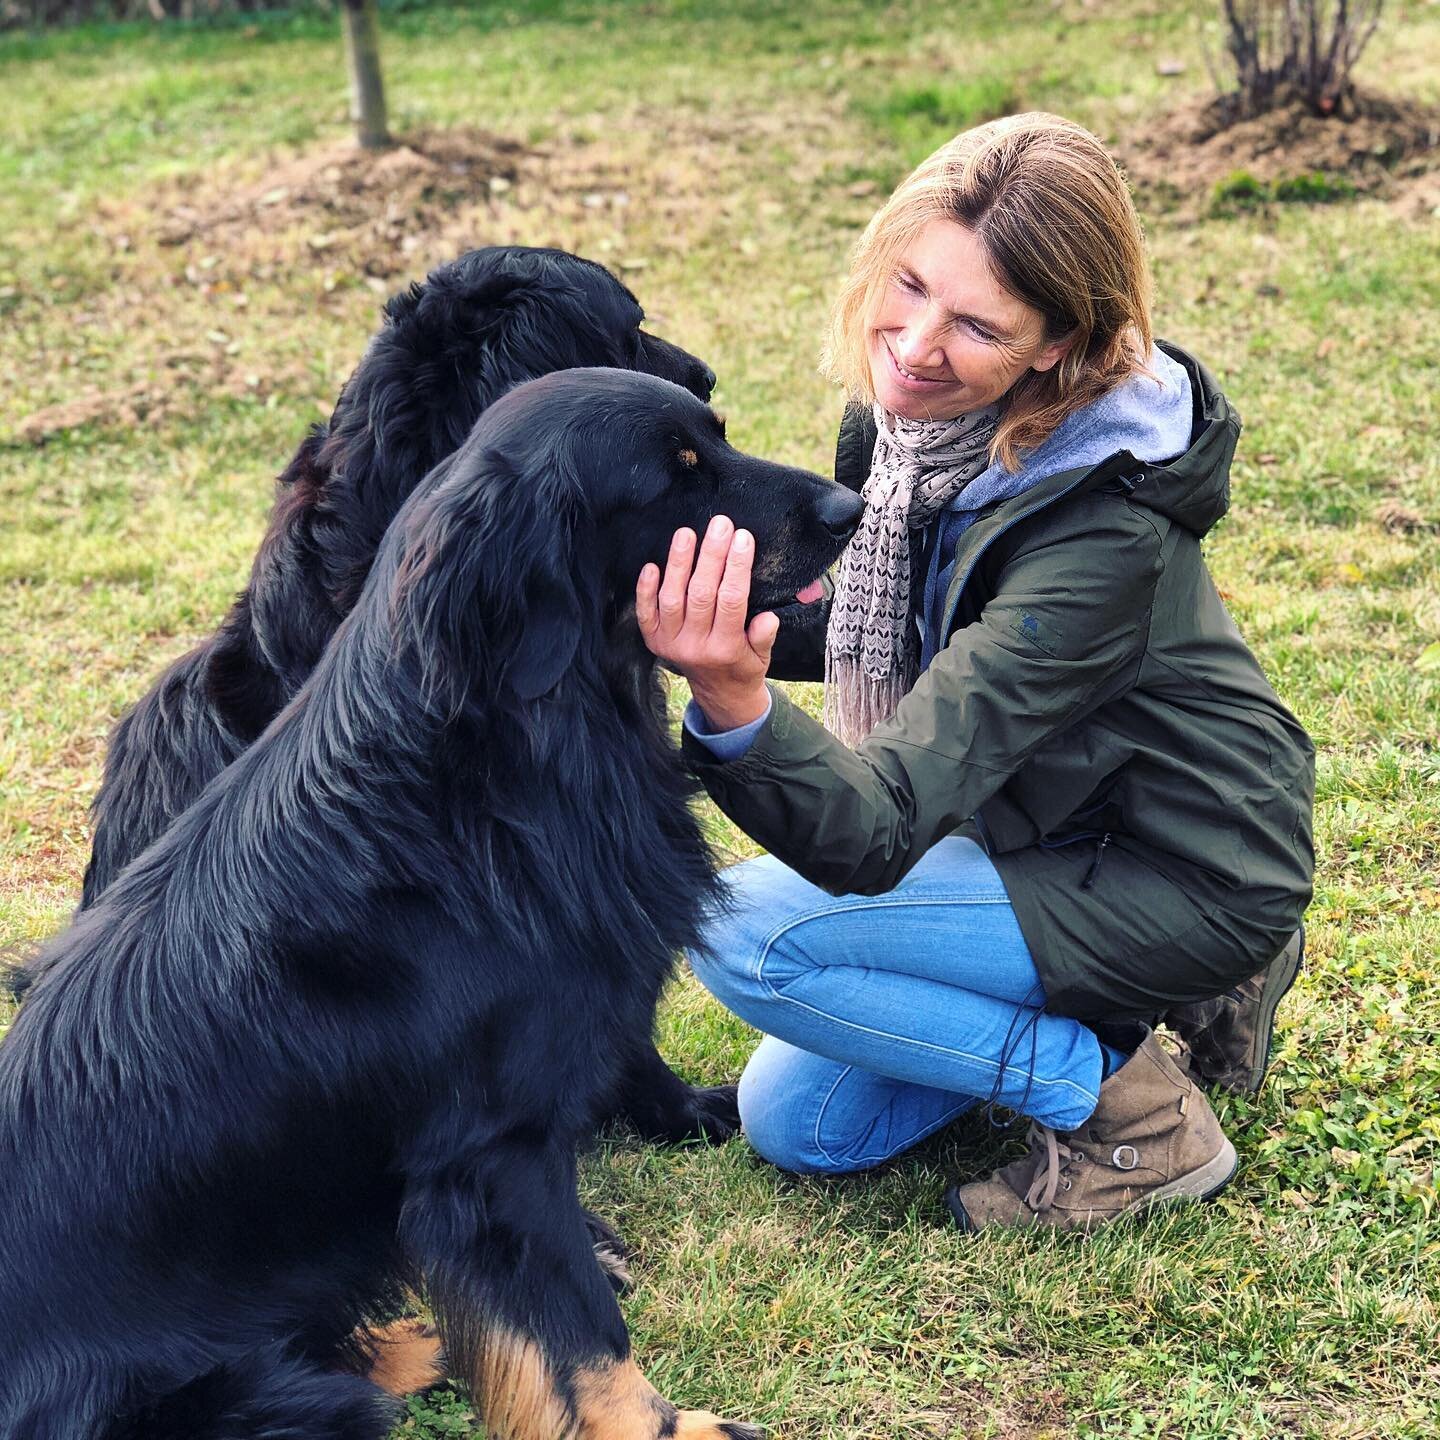 Taking care of more than 120 furry and feathery animals every day, Jana, without any doubt, can be considered a true animal person. But surprisingly, she comes from a family where having an animal was strictly forbidden. So it wasn&rsquo;t until she 